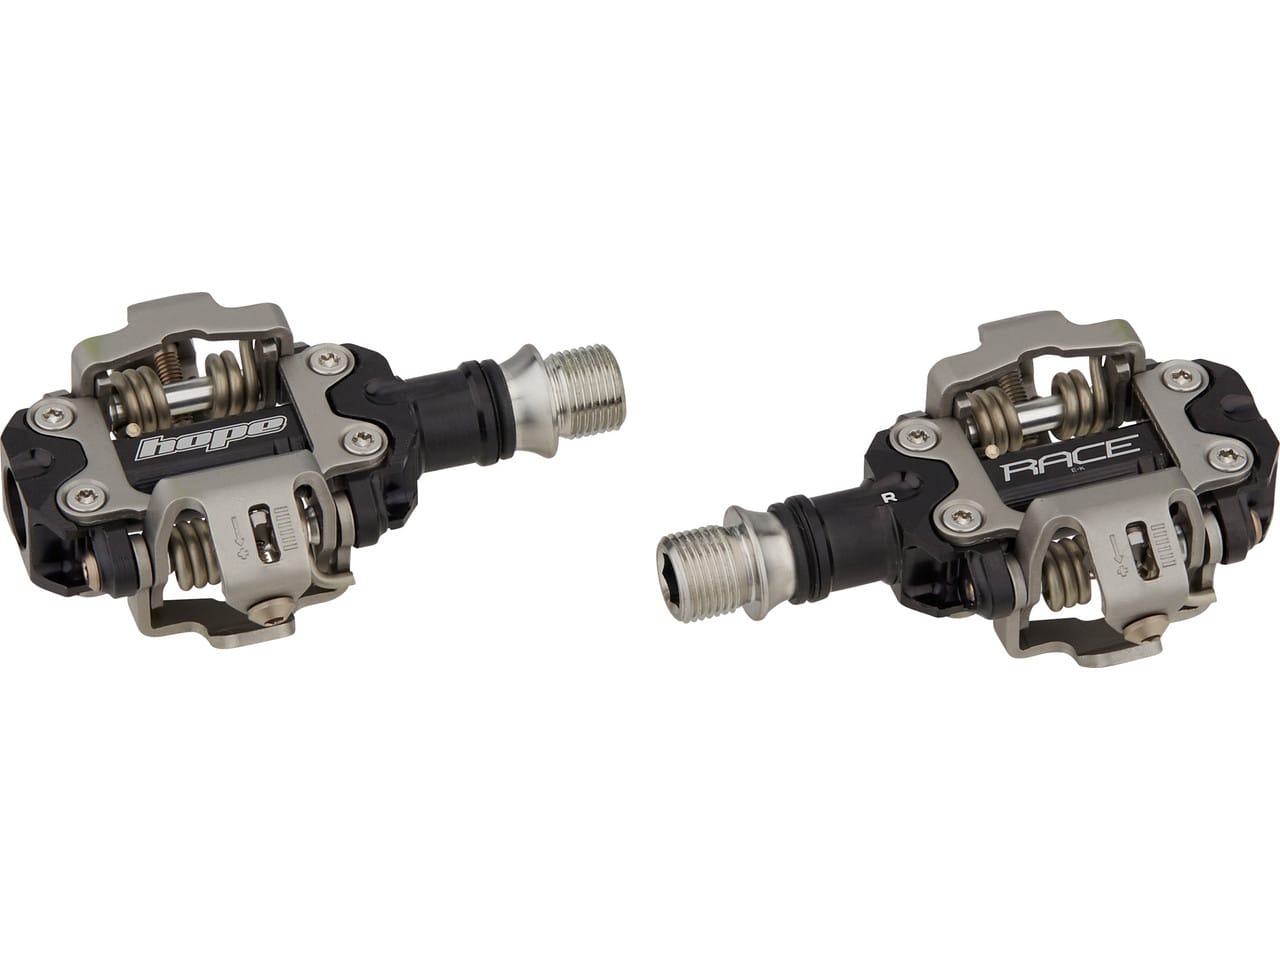 HOPE UNION RC CLIPLESS PEDALS - BLACK